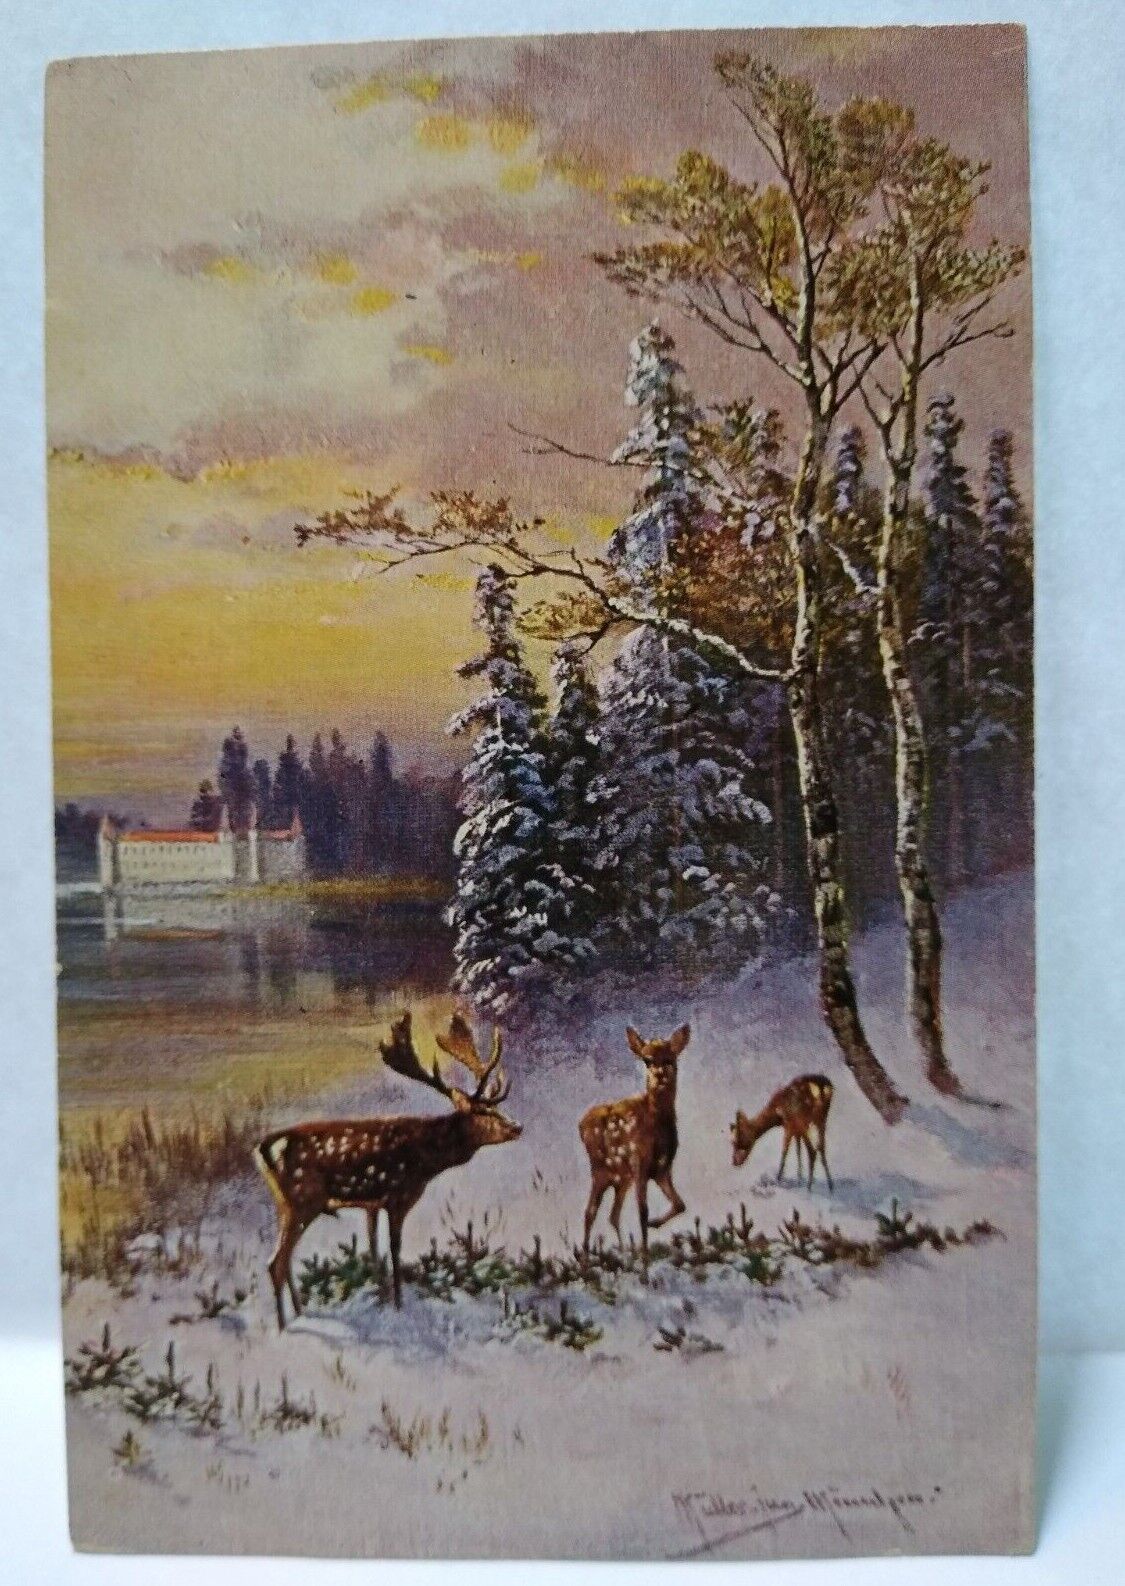 Deer Forest Trees Lake Scenic View Postcard Signed Muller Germany Serie 278 HK&M